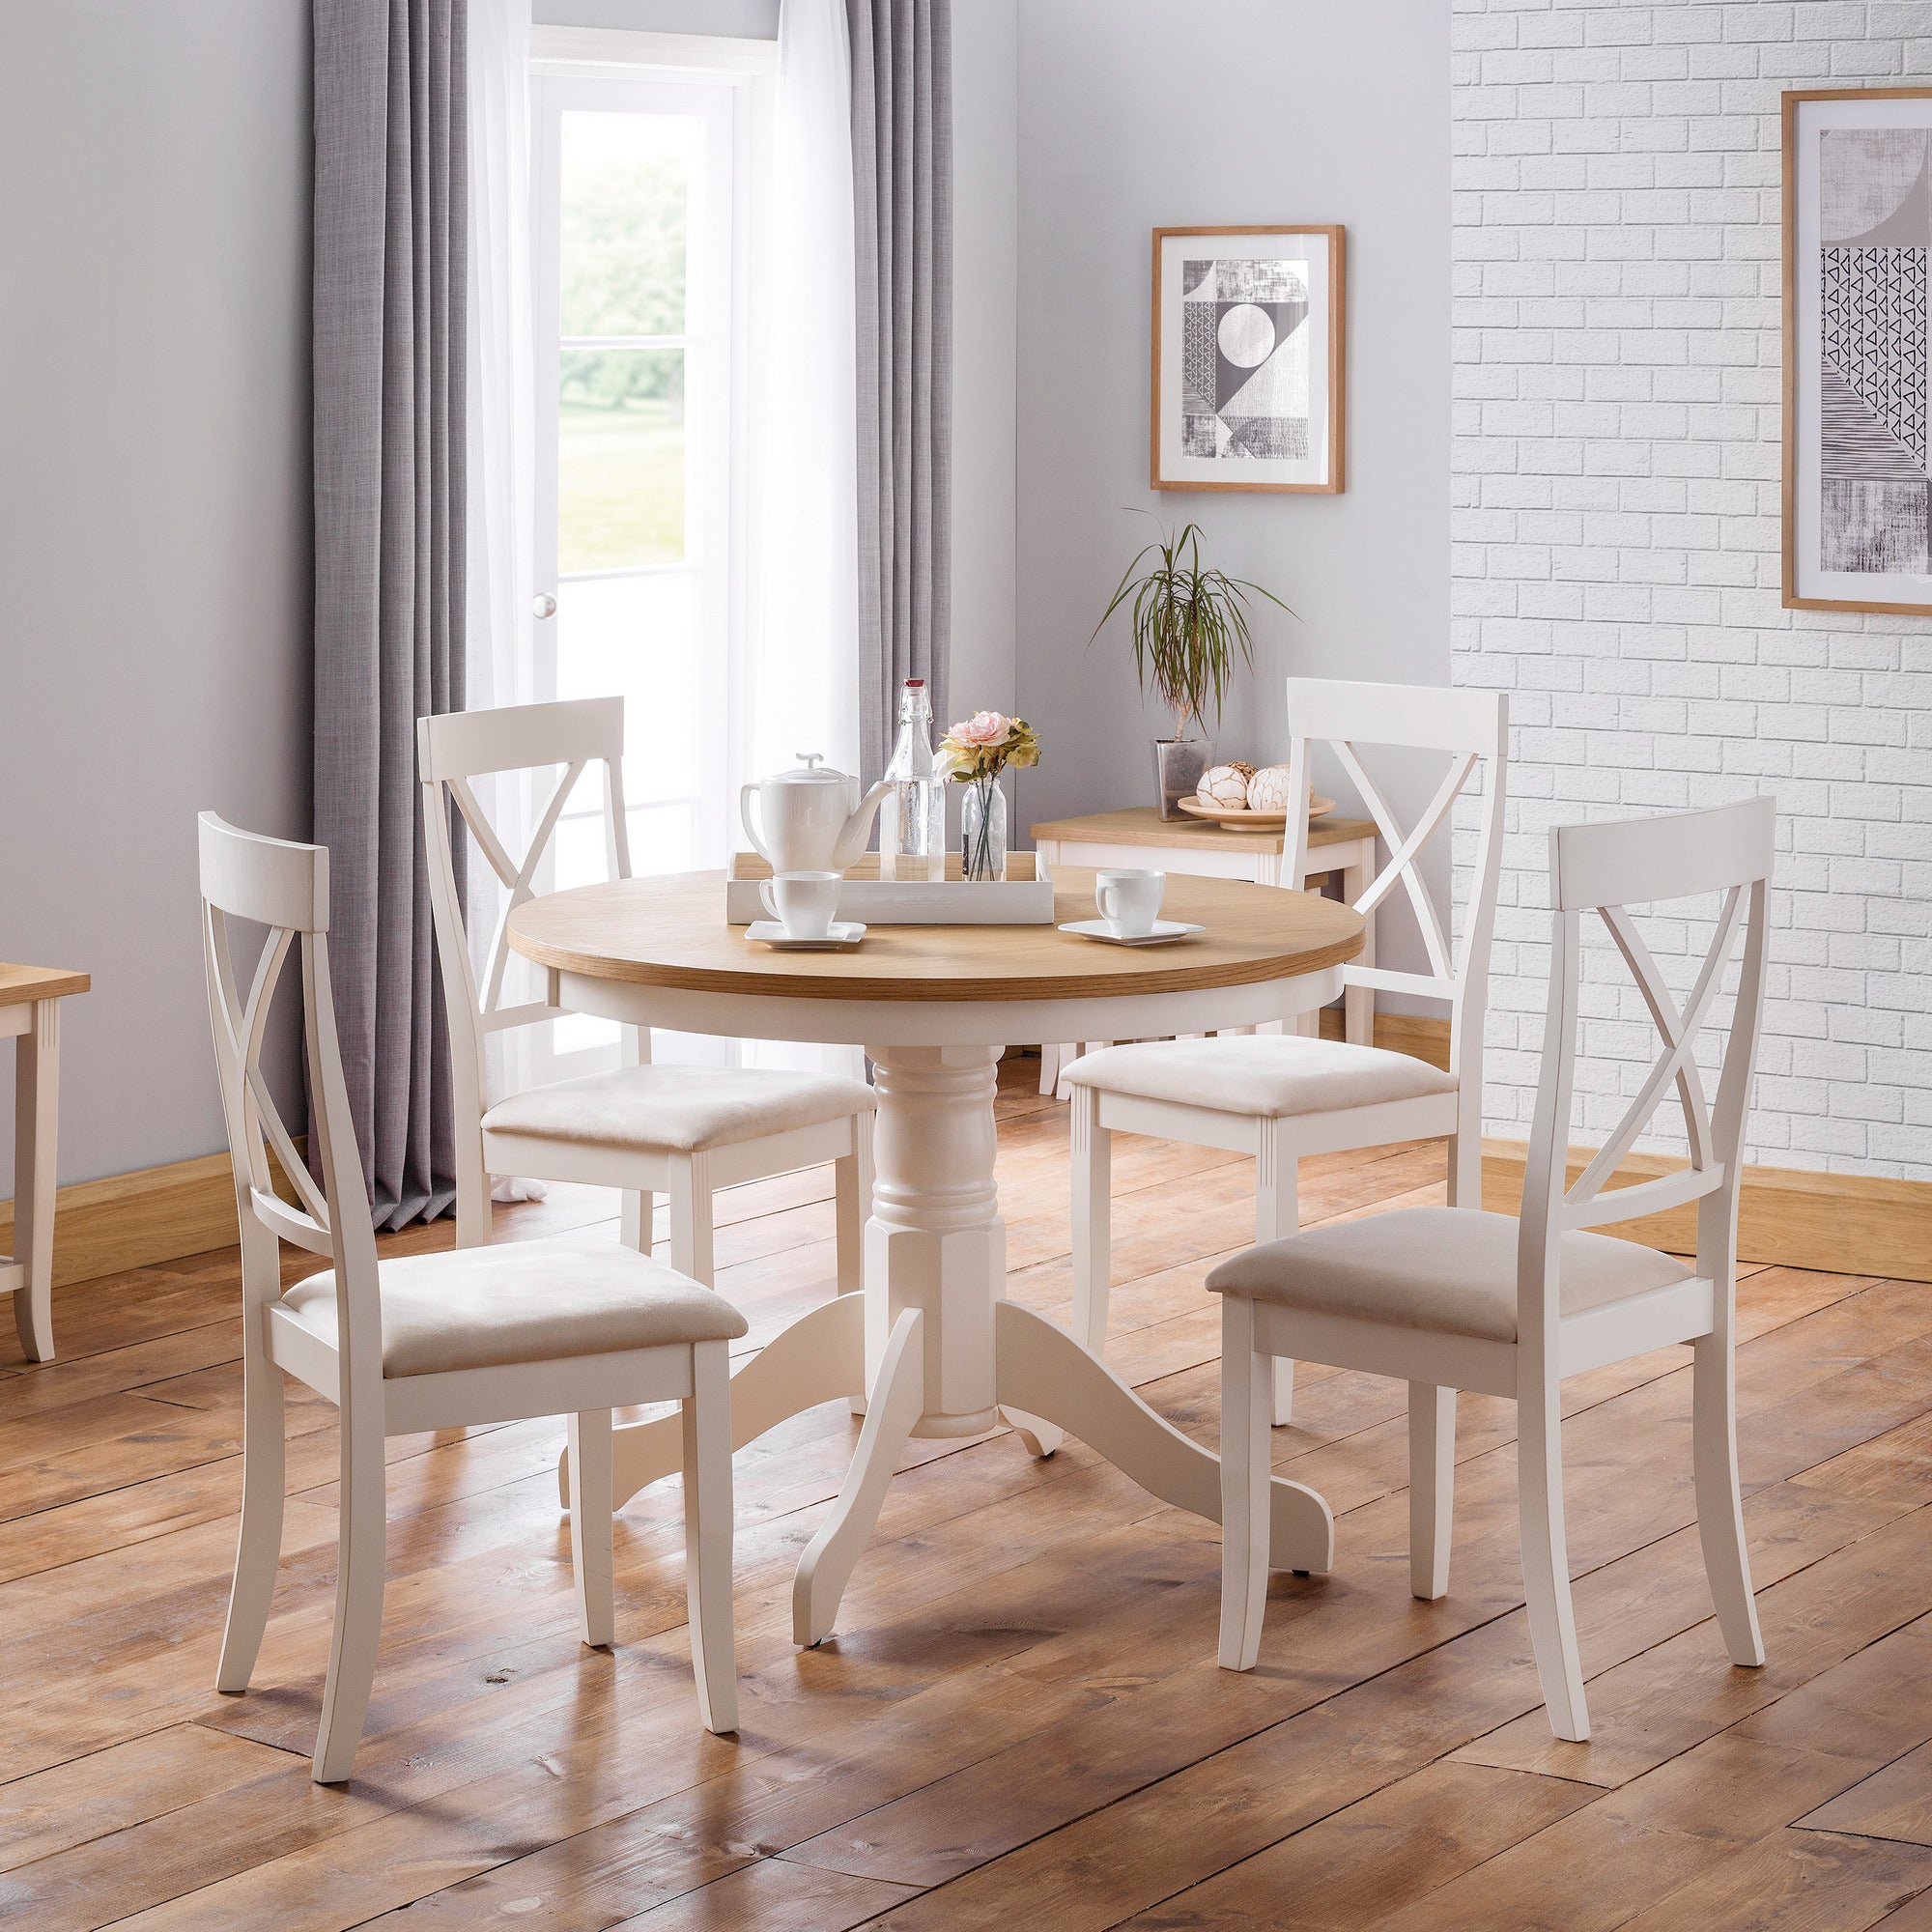 Davenport Round Pedestal Dining Table with 4 Chairs, Off White